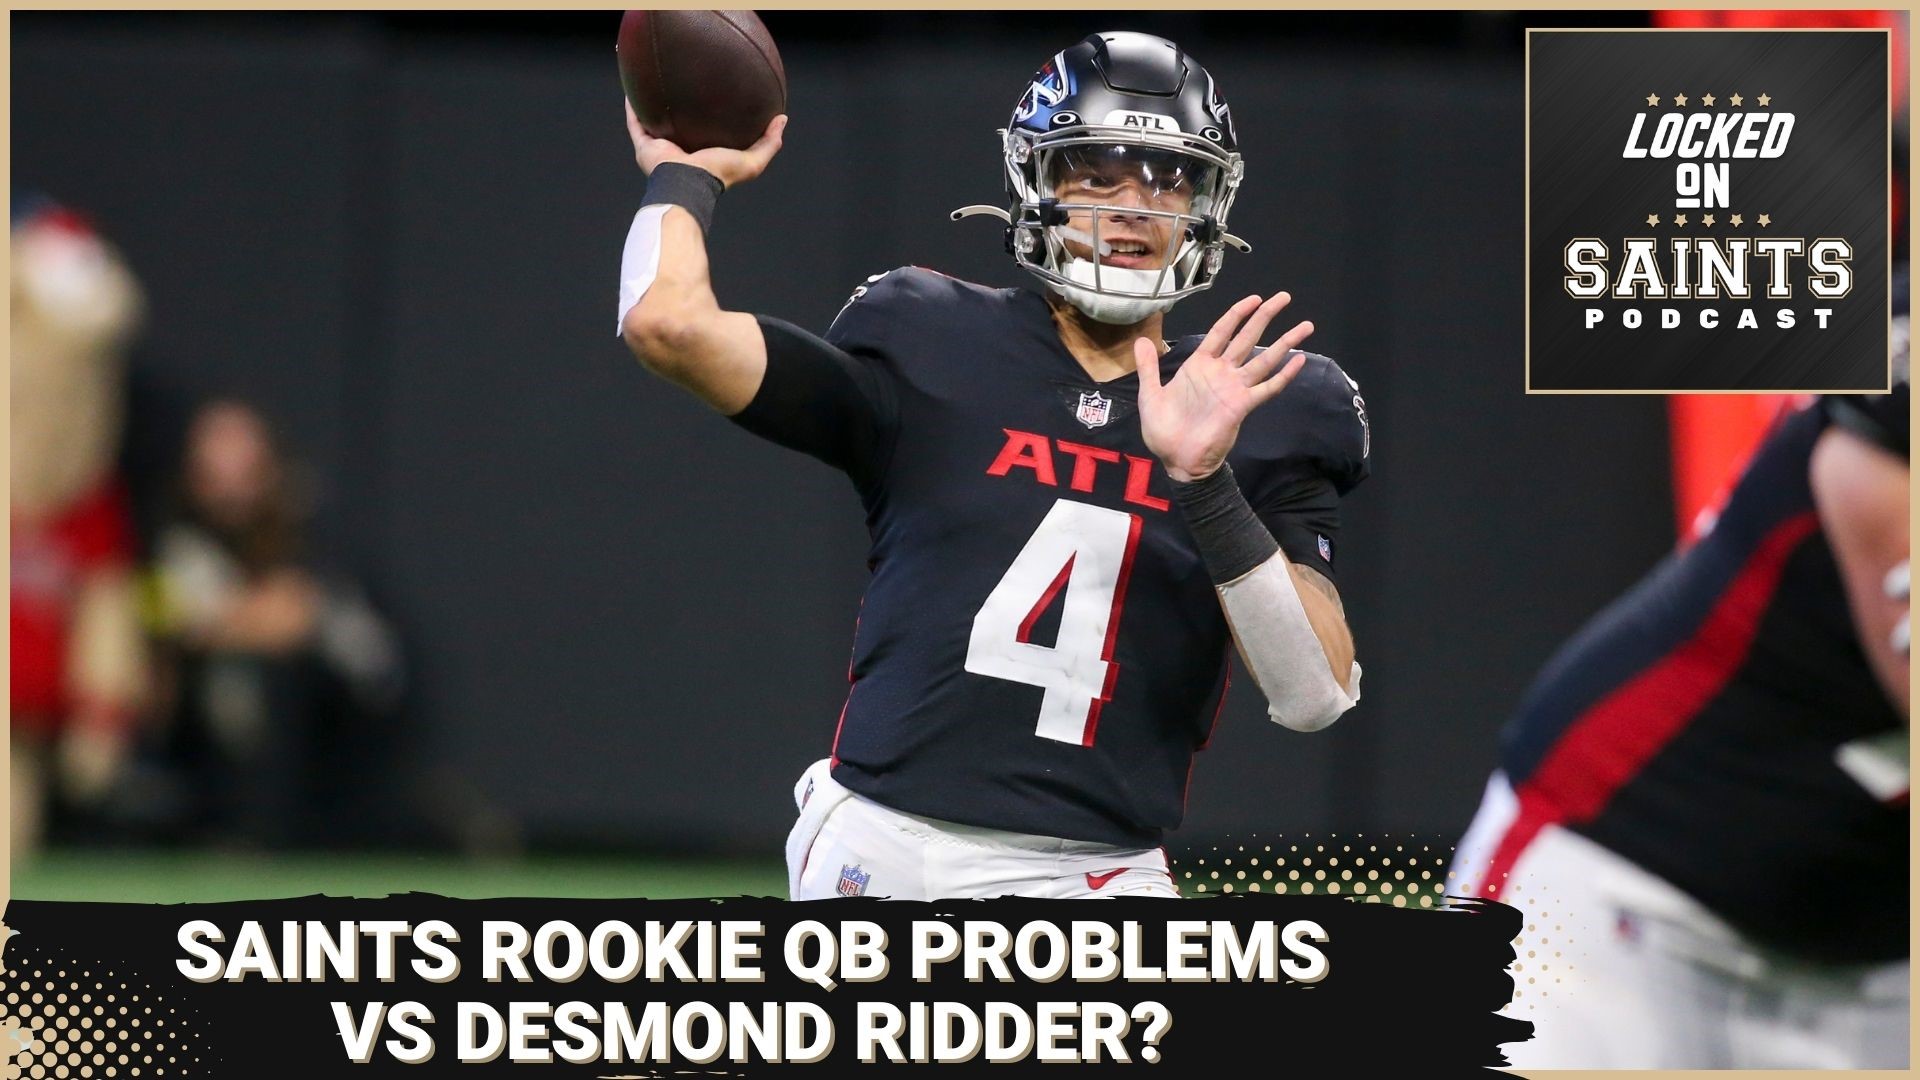 New Orleans Saints defenses have consistently struggled against rookie QBs and mobile passers, Atlanta Falcons Desmond Ridder presents both challenges.